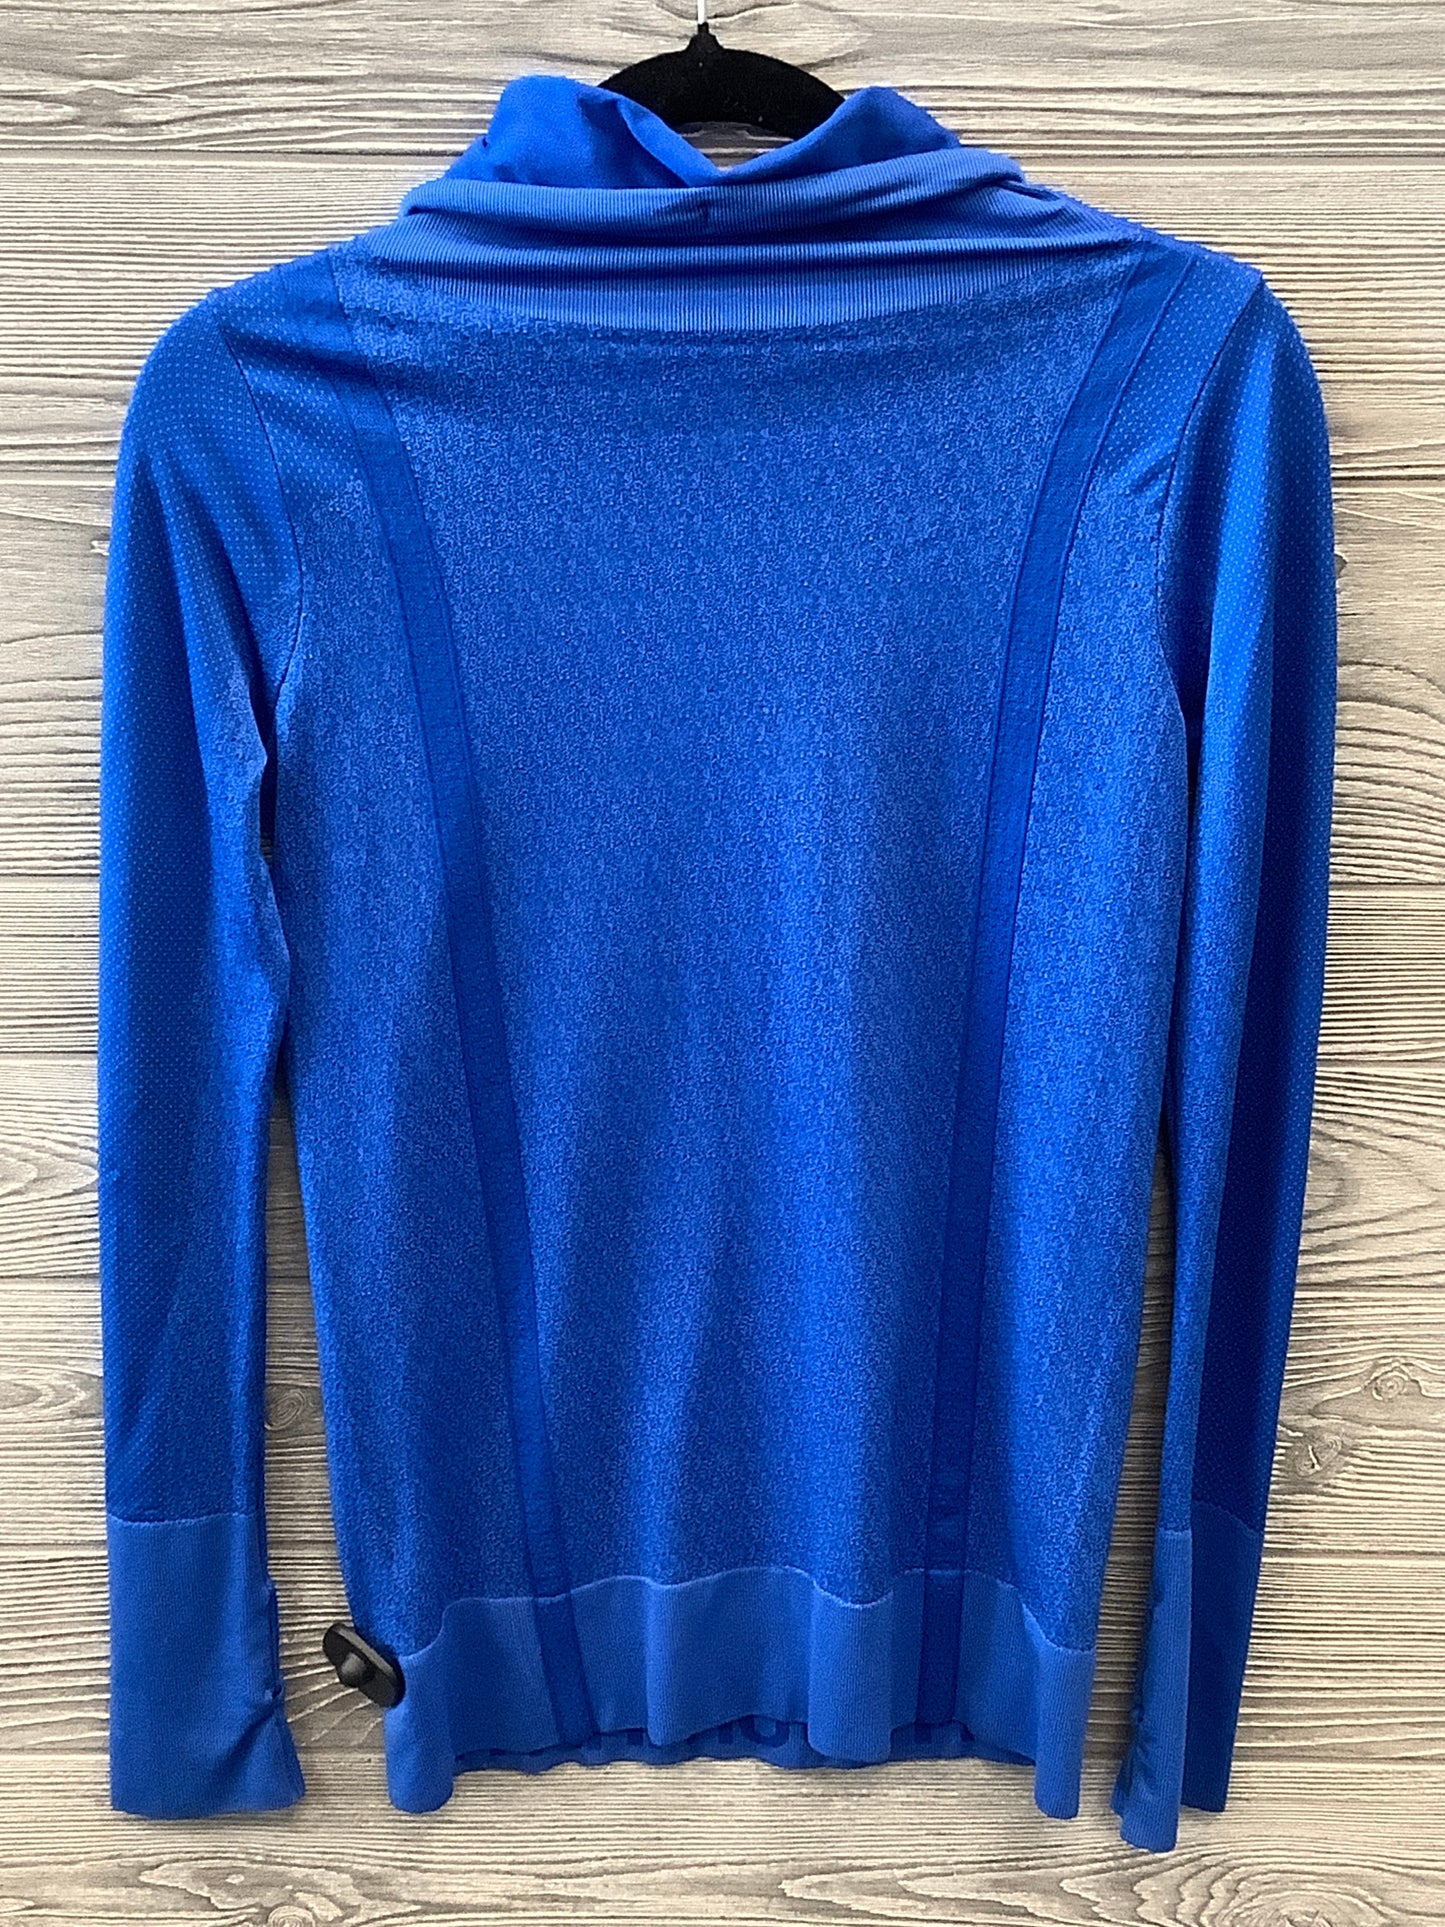 Athletic Top Long Sleeve Crewneck By Under Armour  Size: Xs